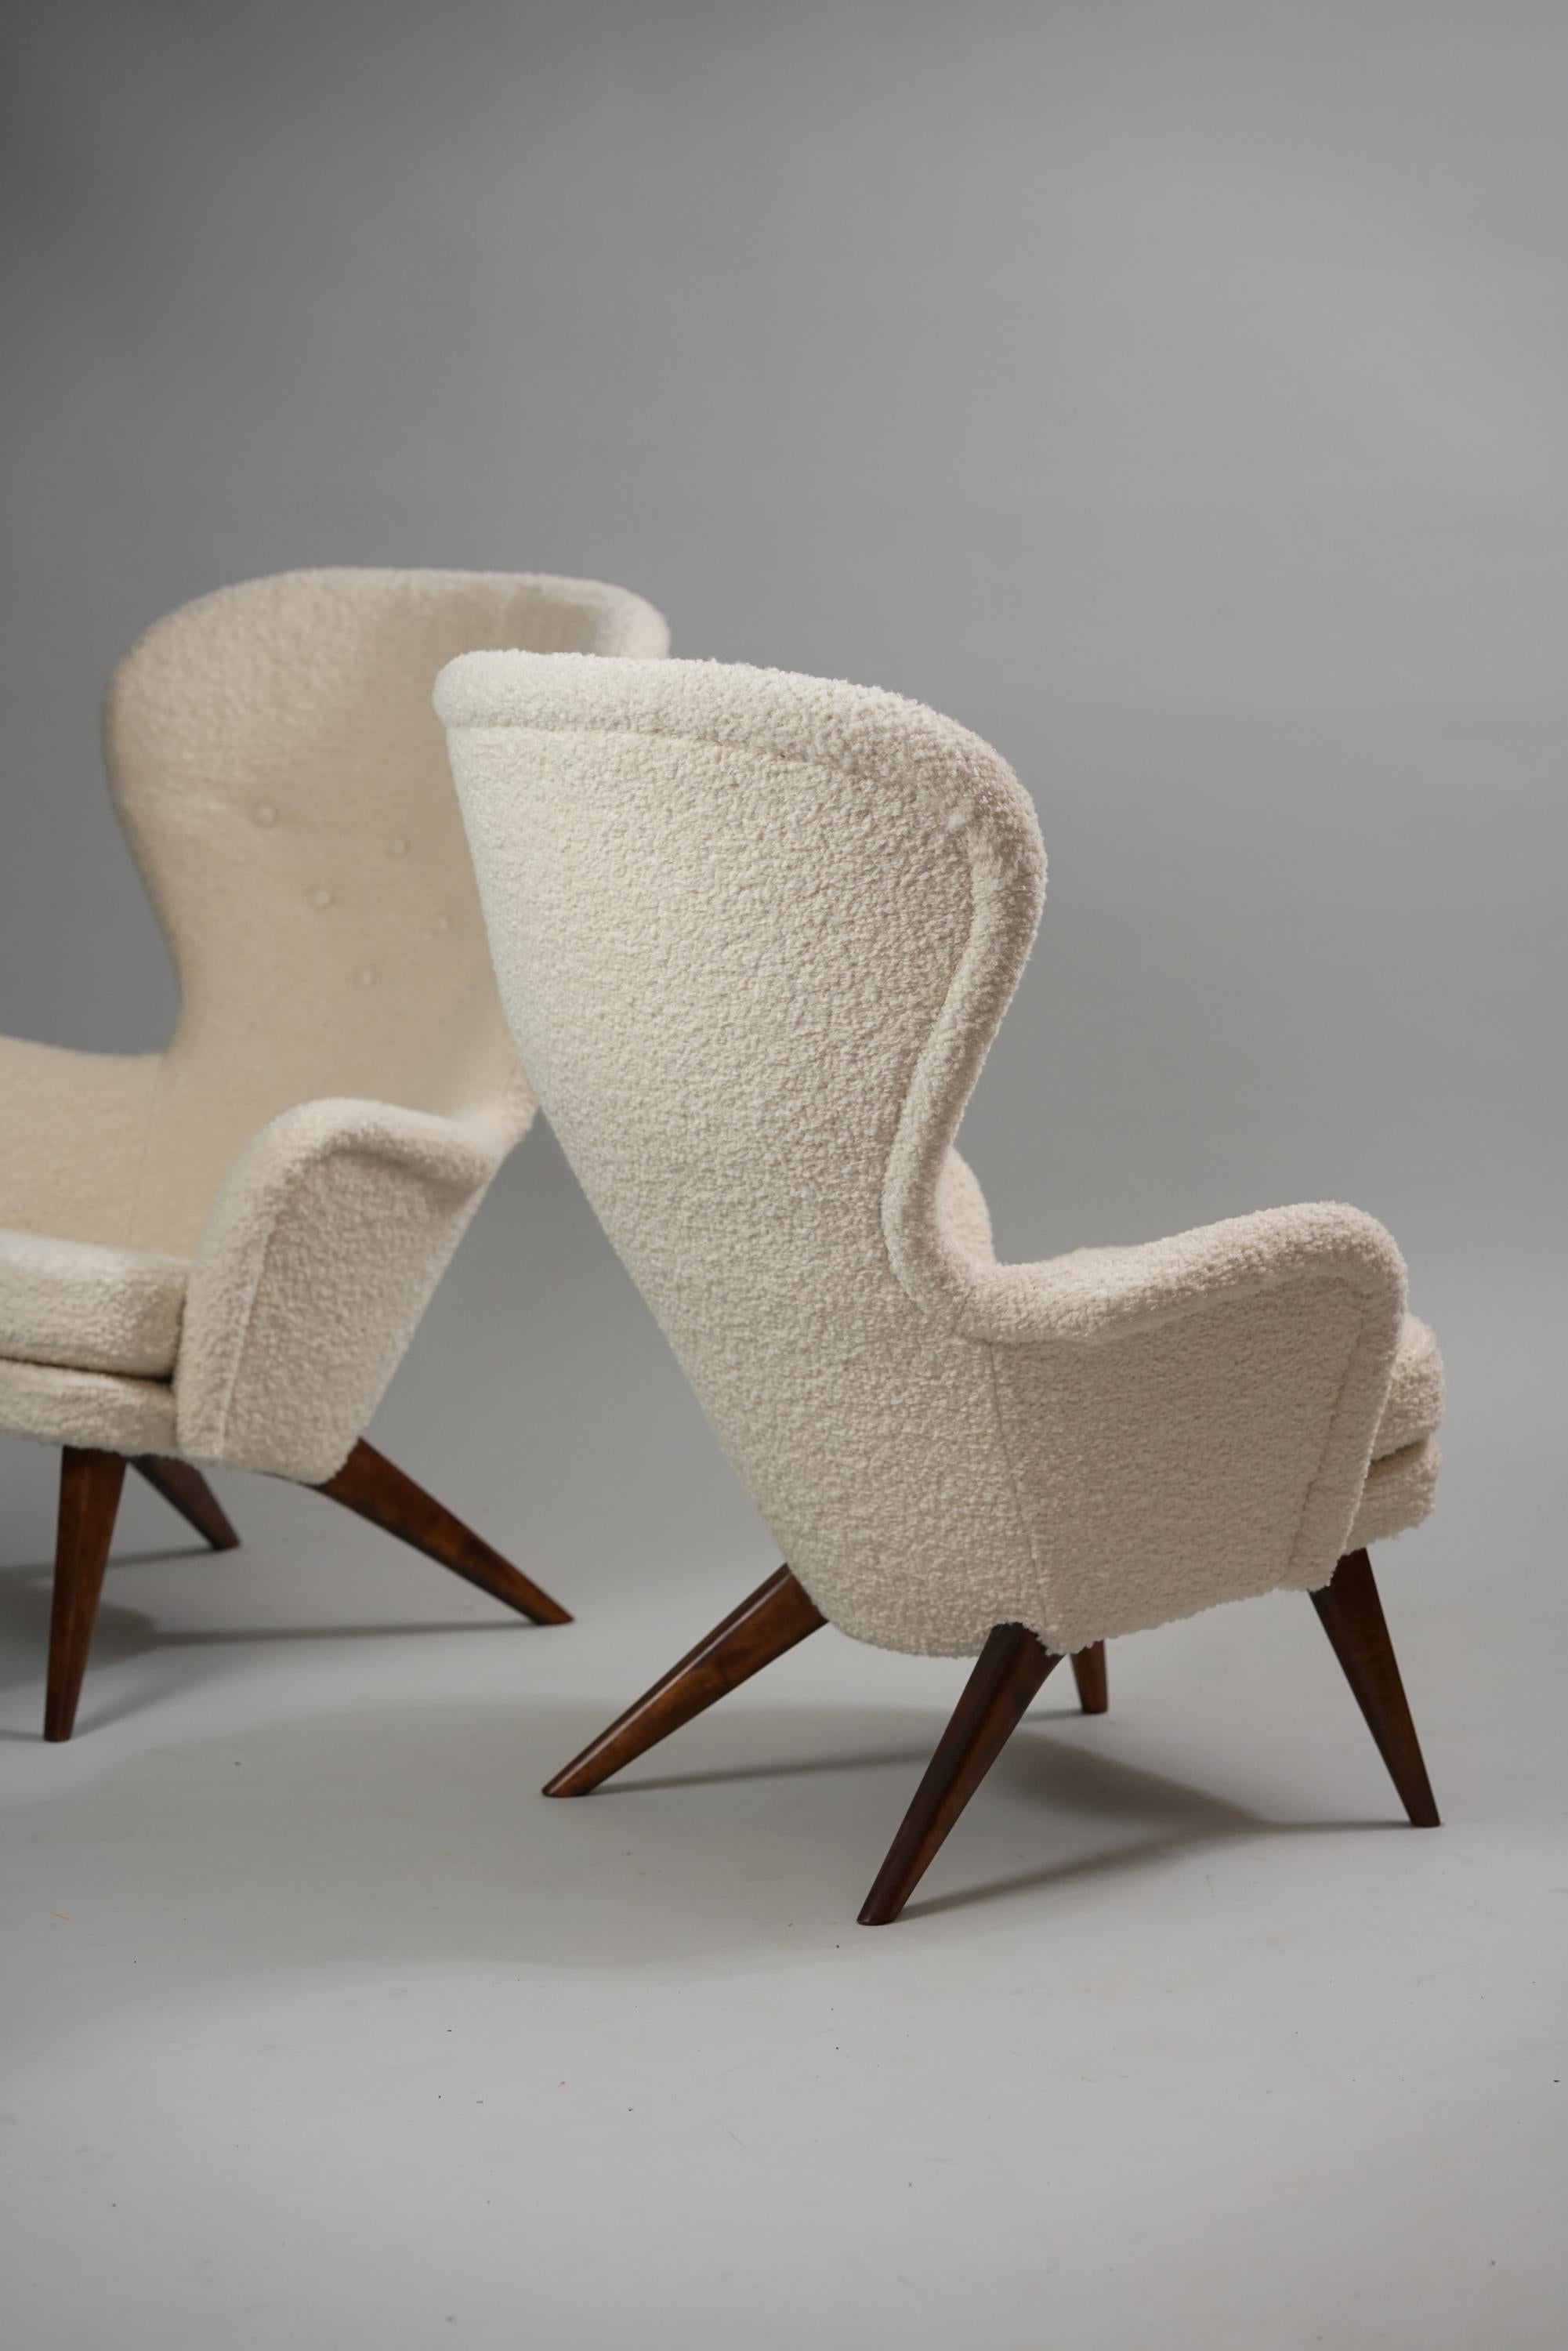 Set of Two Model Siesta Armchairs, Carl Gustaf Hiort af Ornäs, Hiort Tuote, 1950 For Sale 1